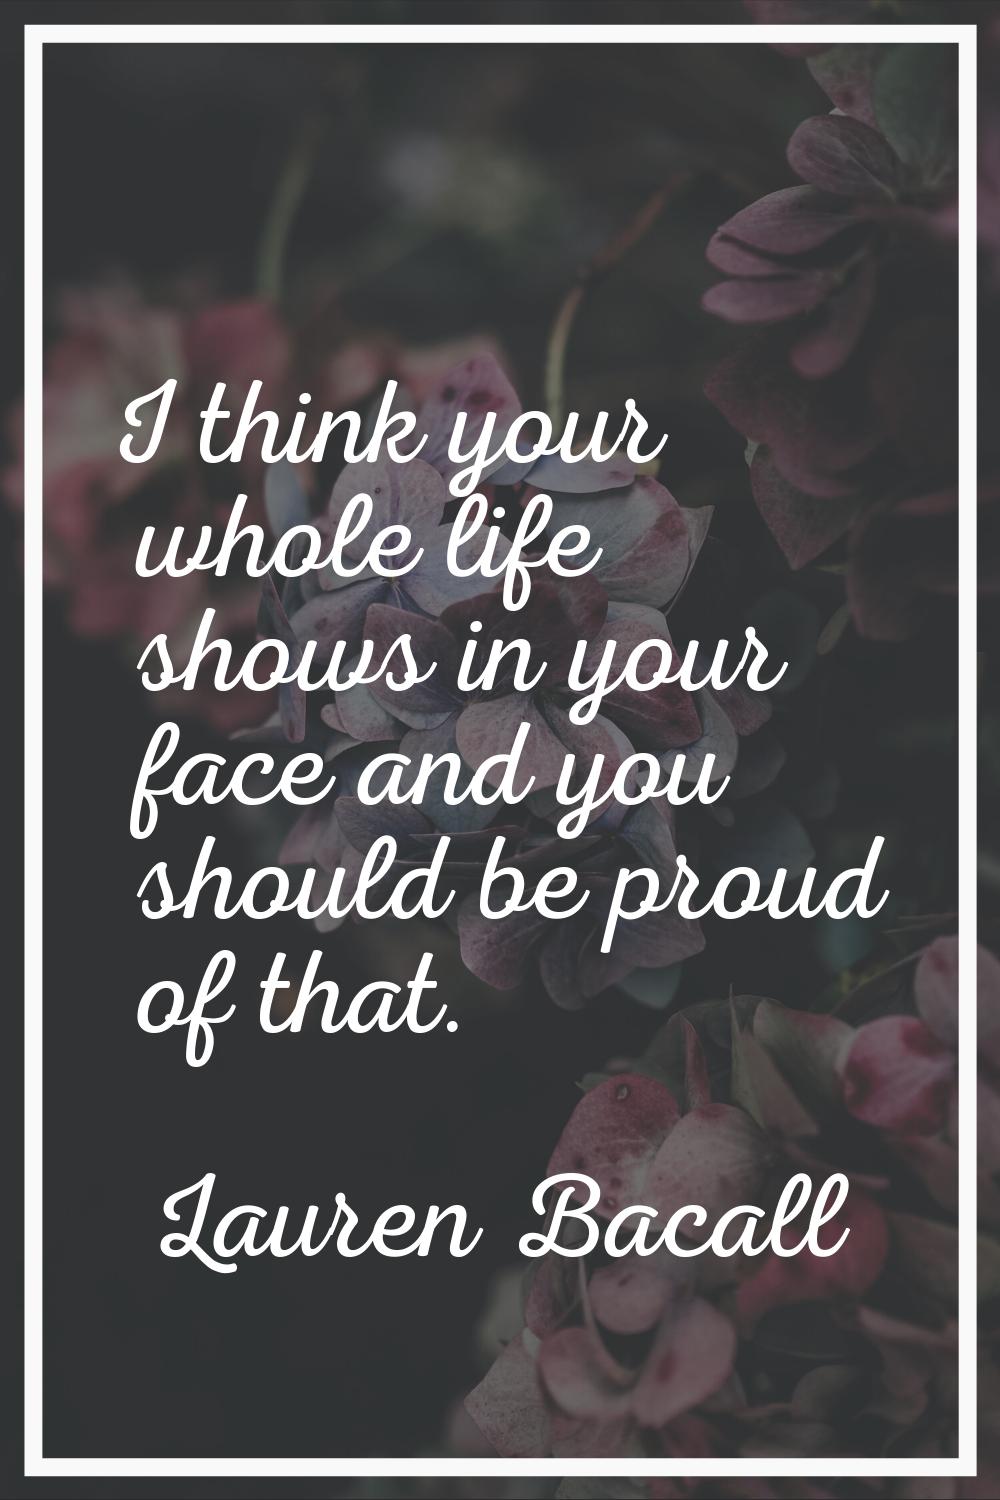 I think your whole life shows in your face and you should be proud of that.